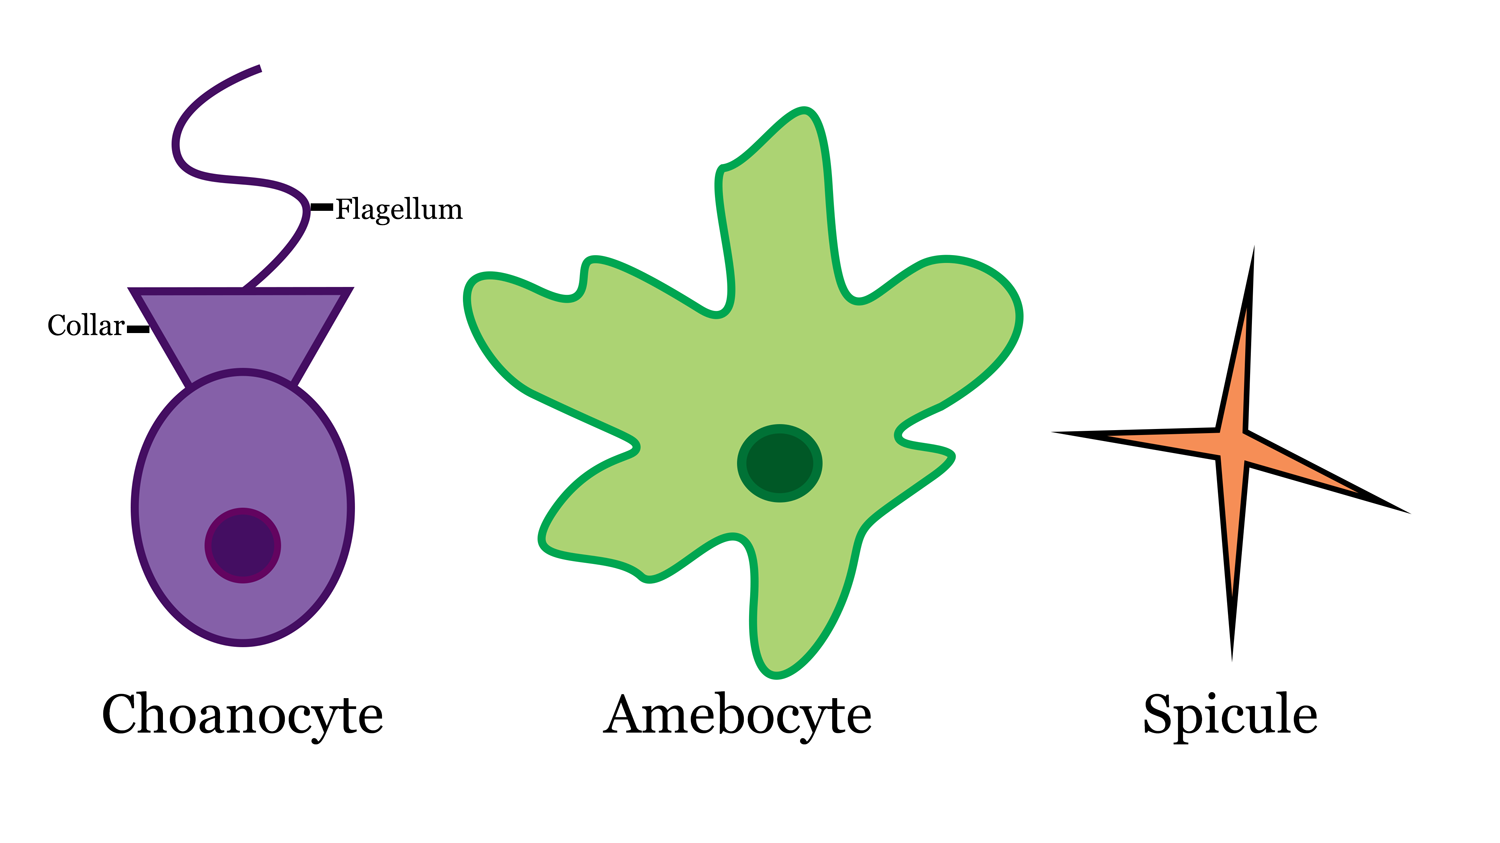 Diagram of sponge cells (choanocyte and amebocyte) and spicule